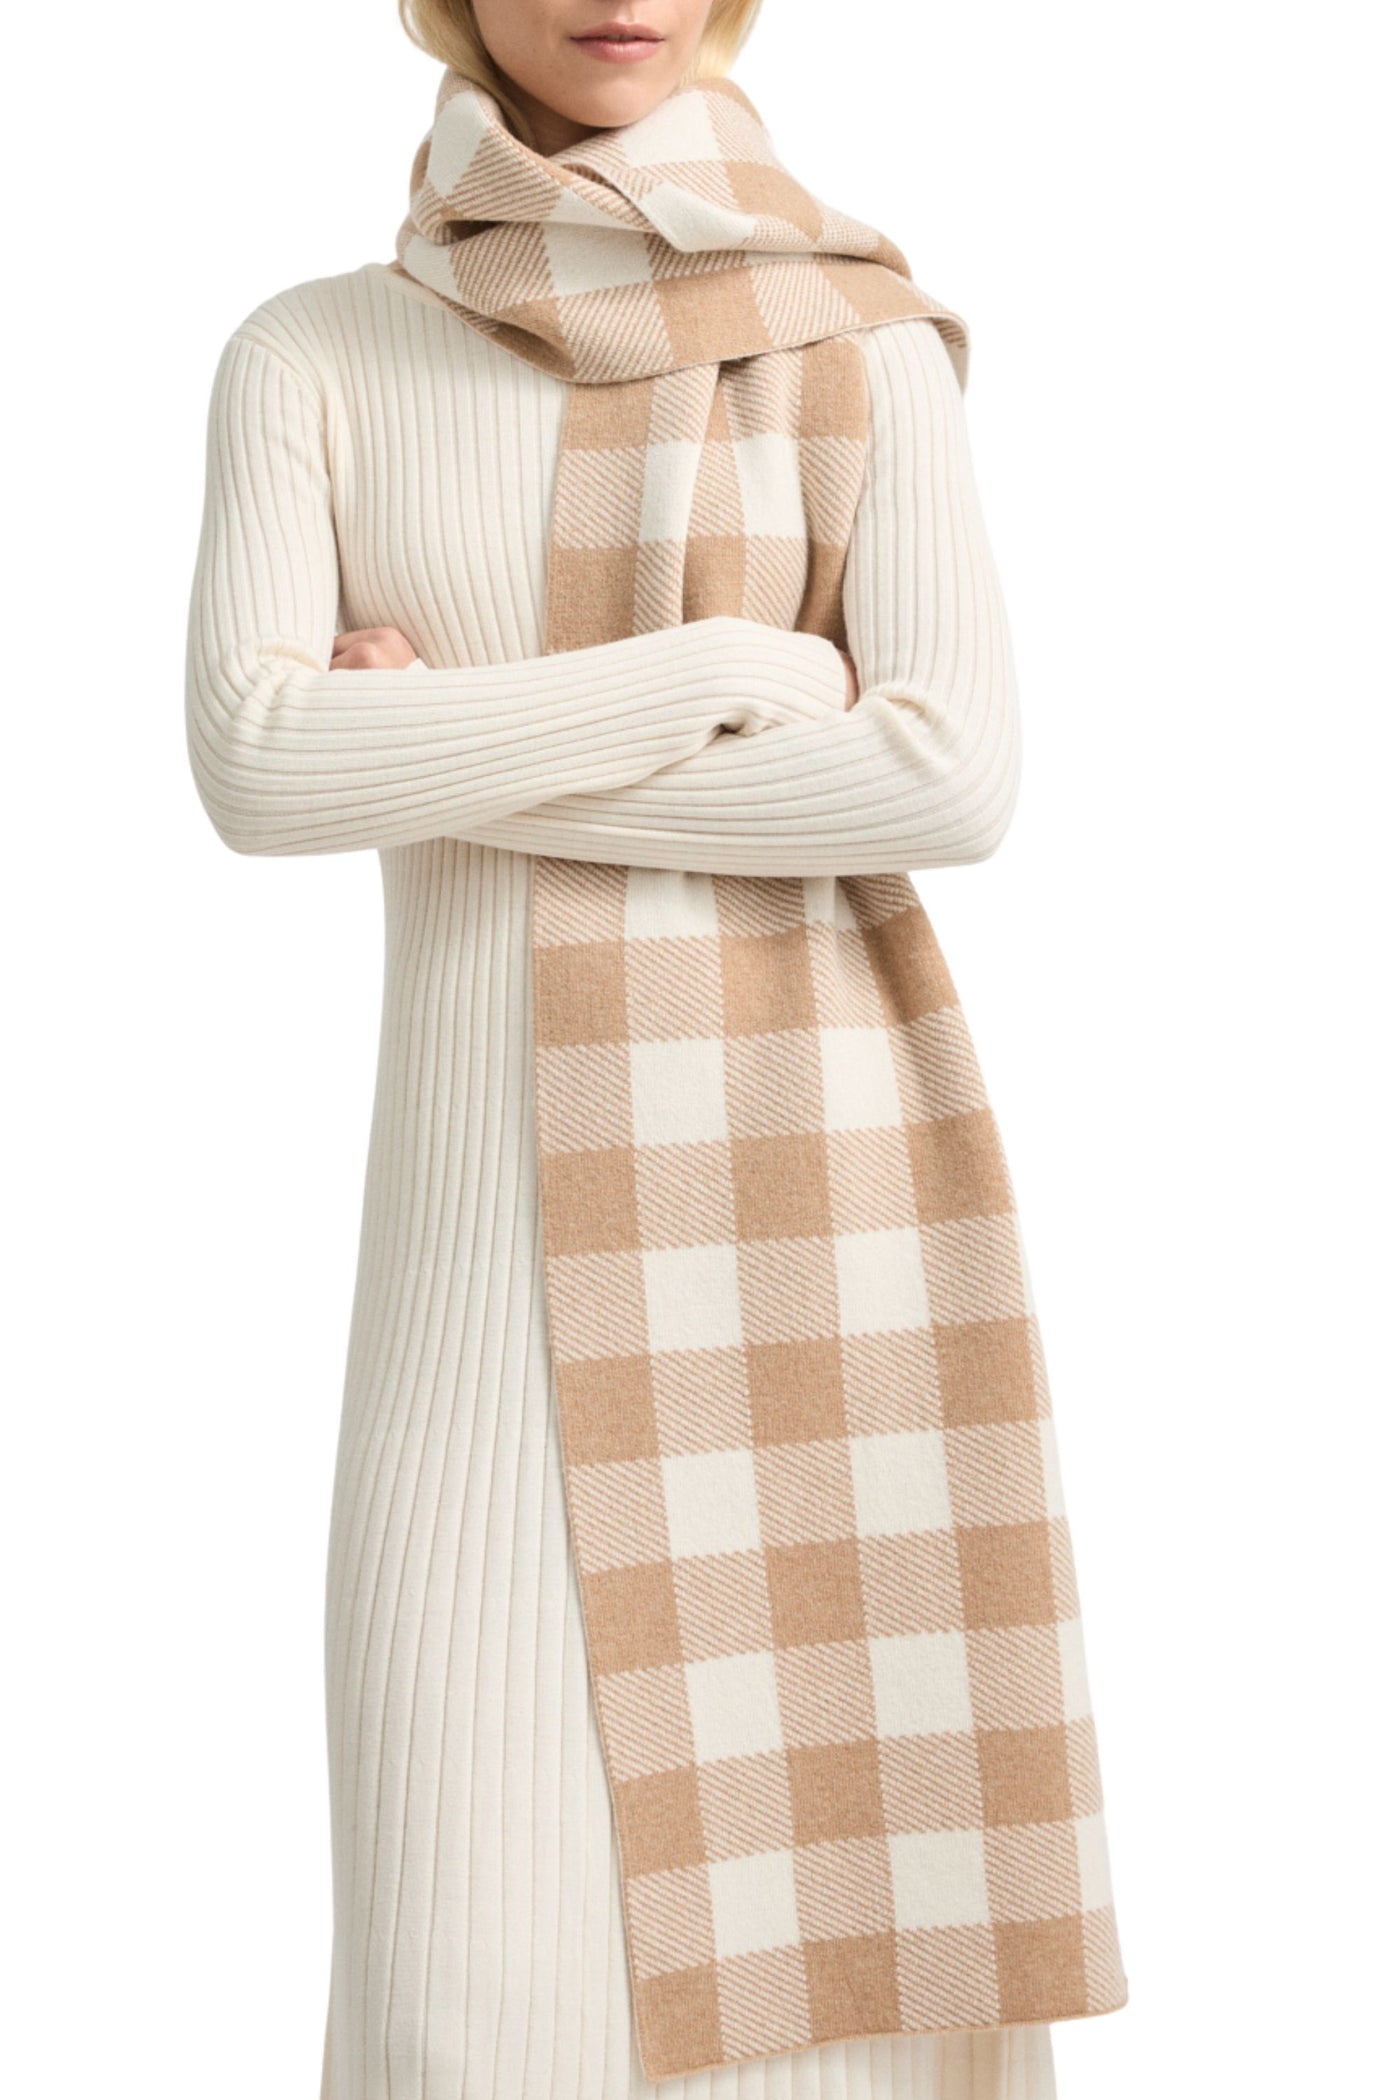 CHECKED WOOL SCARF - 9068